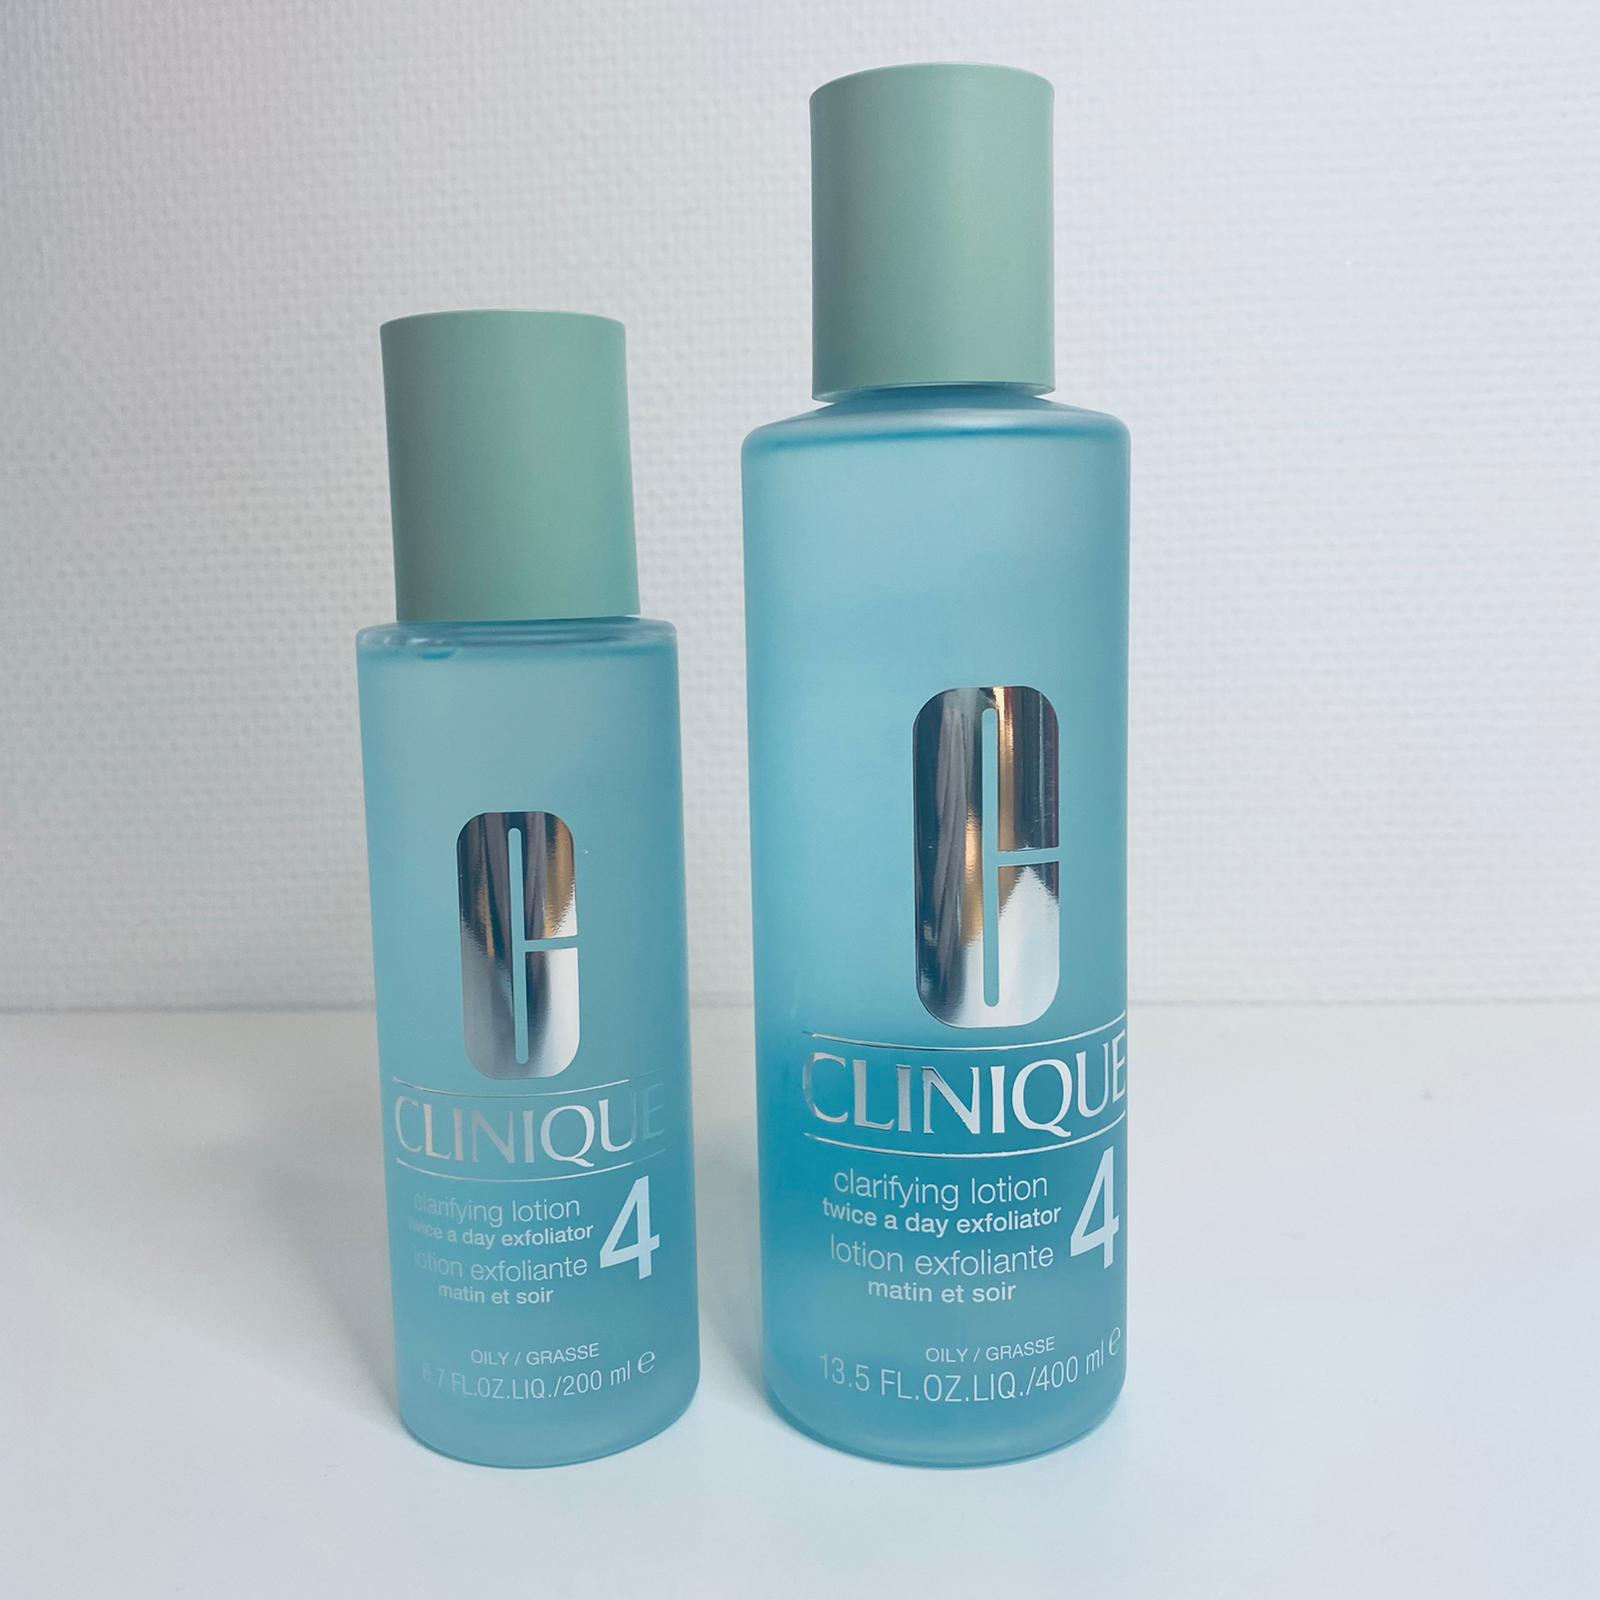 Clinique Clarifying Lotion 4 olie skin 200 ML